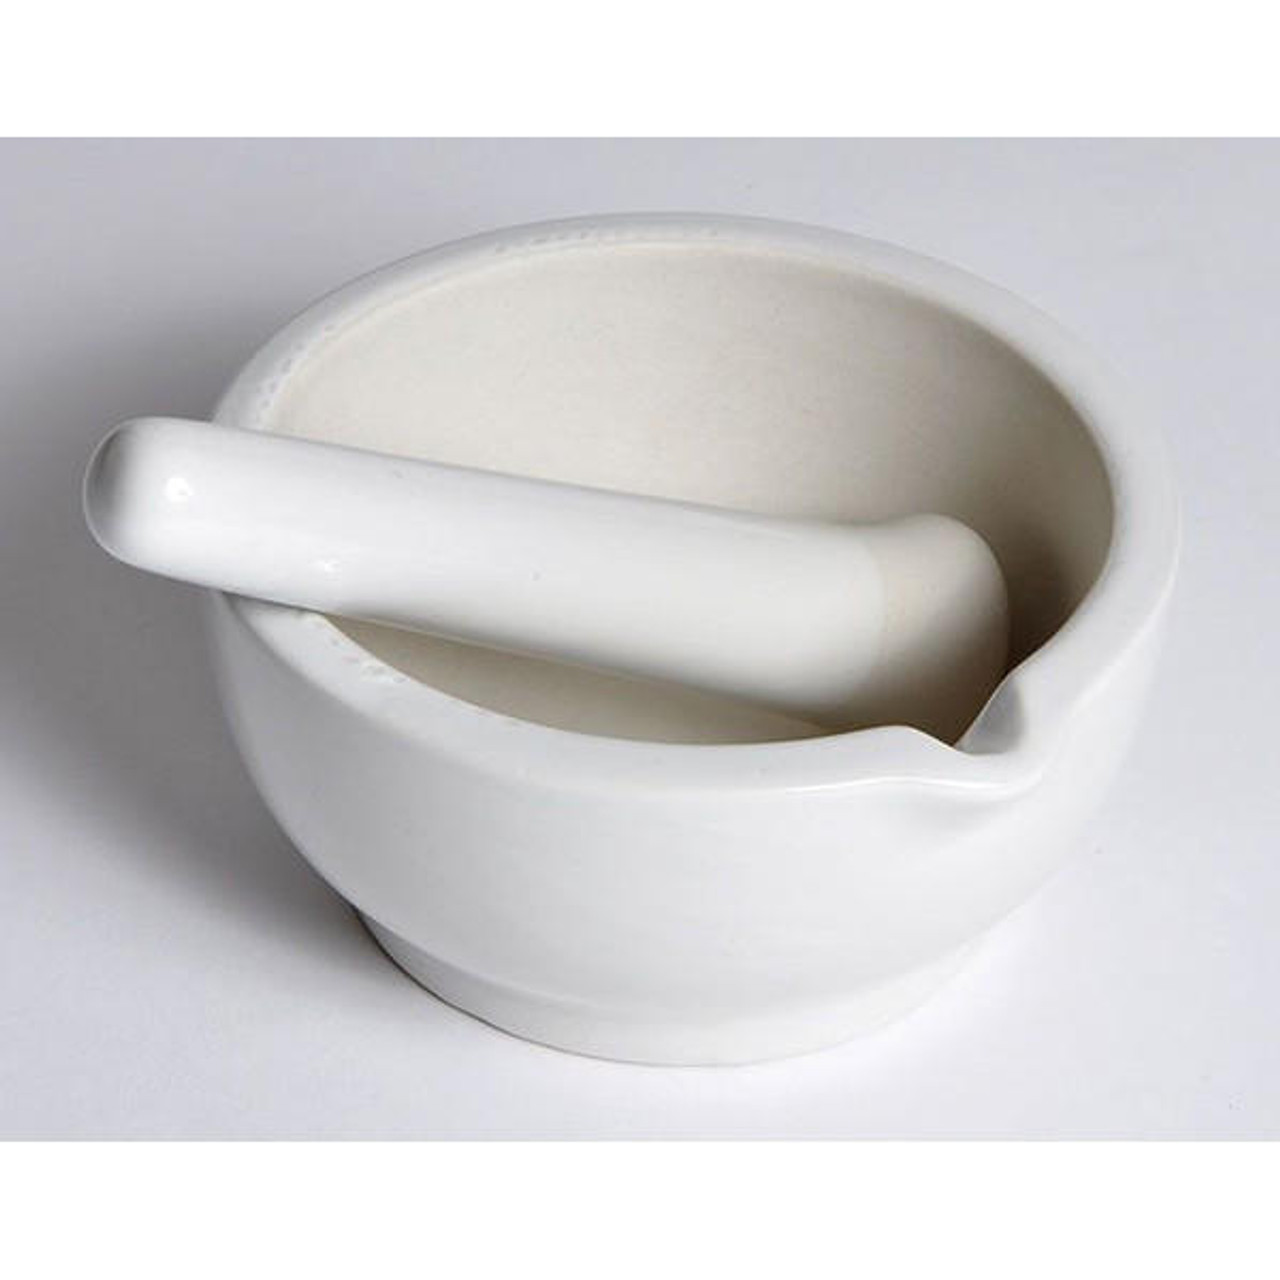 Mortar and Pestle Set - Small Grinding Bowl Container for